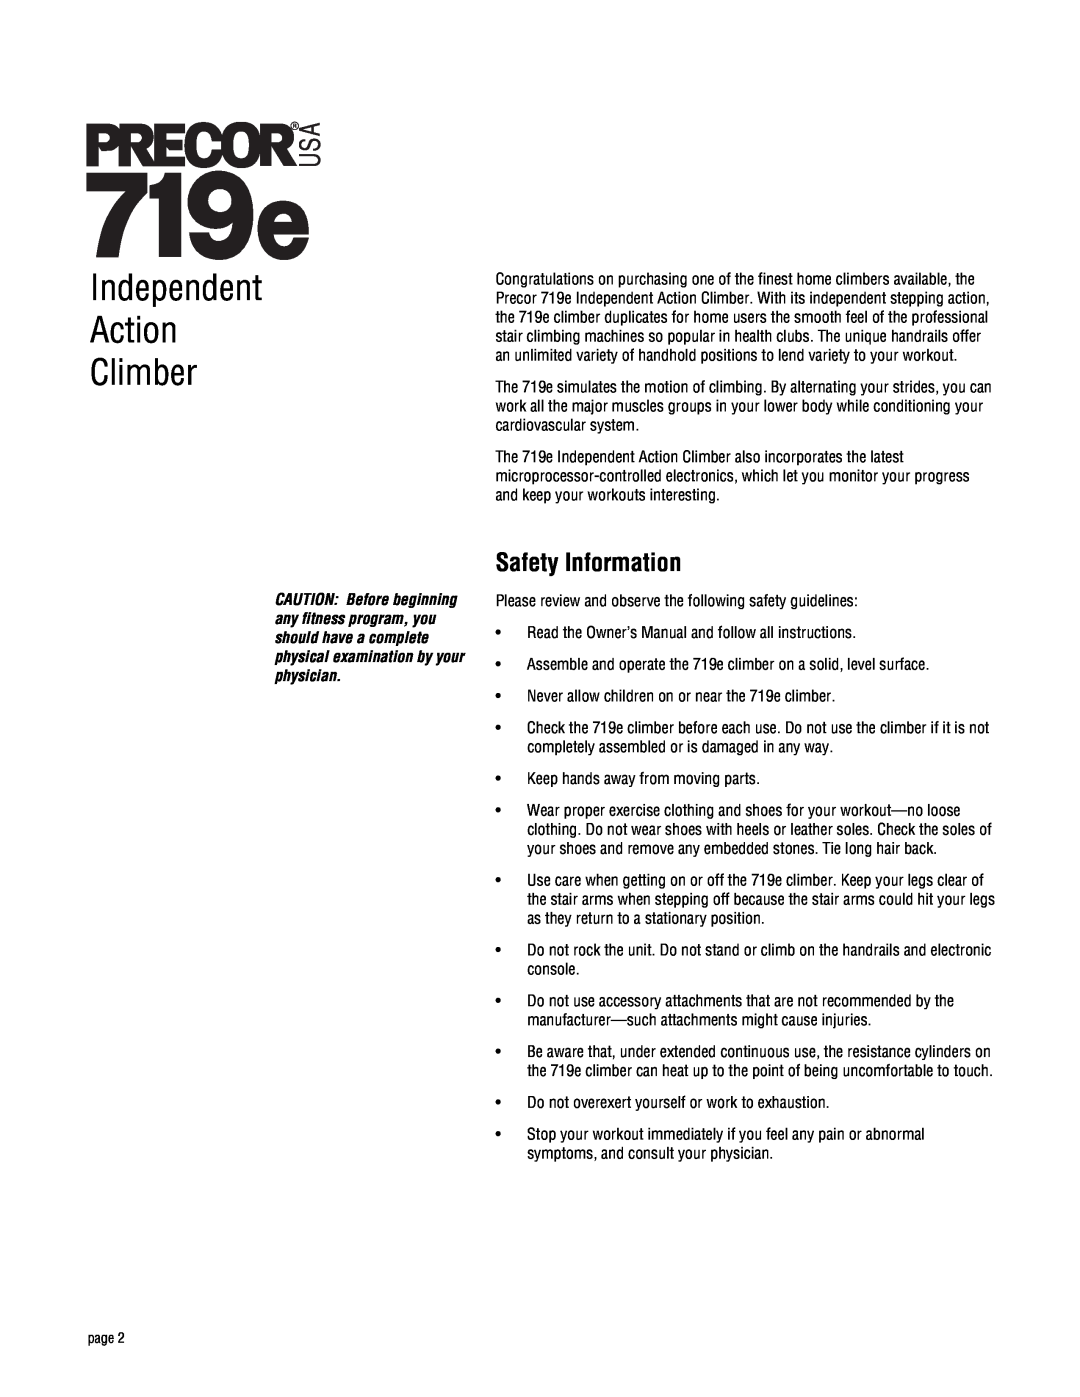 Precor 719e owner manual Safety Information, Independent Action Climber 